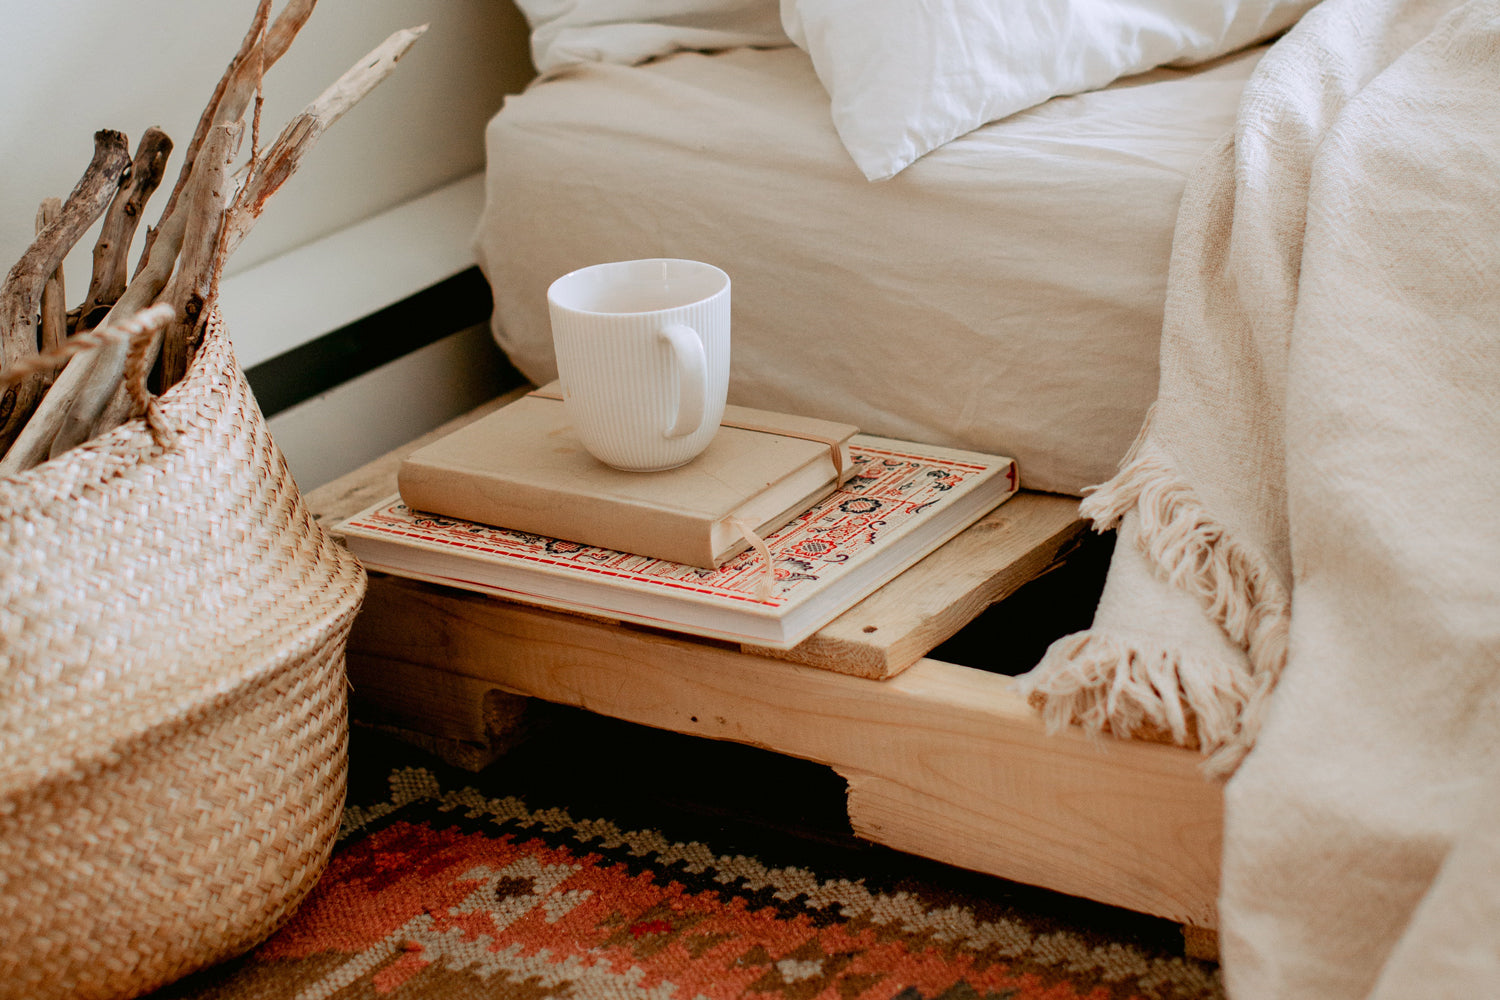 A stack of books under a mug next to a bed